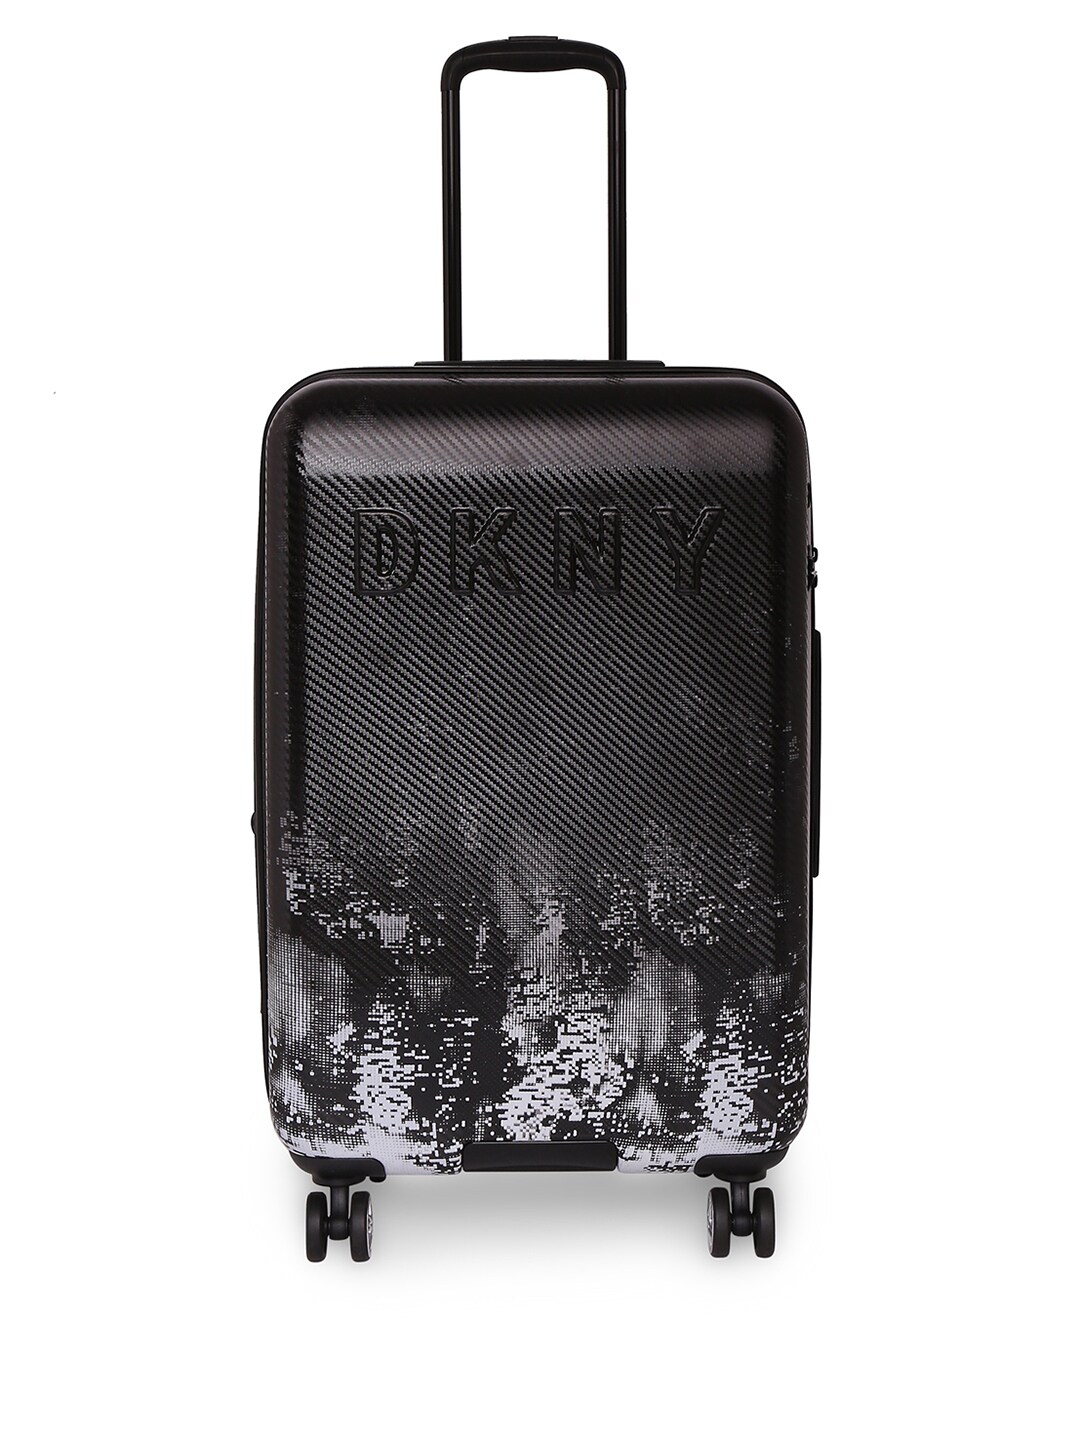 DKNY GLIMMER Unisex Black Textured Hard-Sided Cabin Trolley Suitcase Price in India